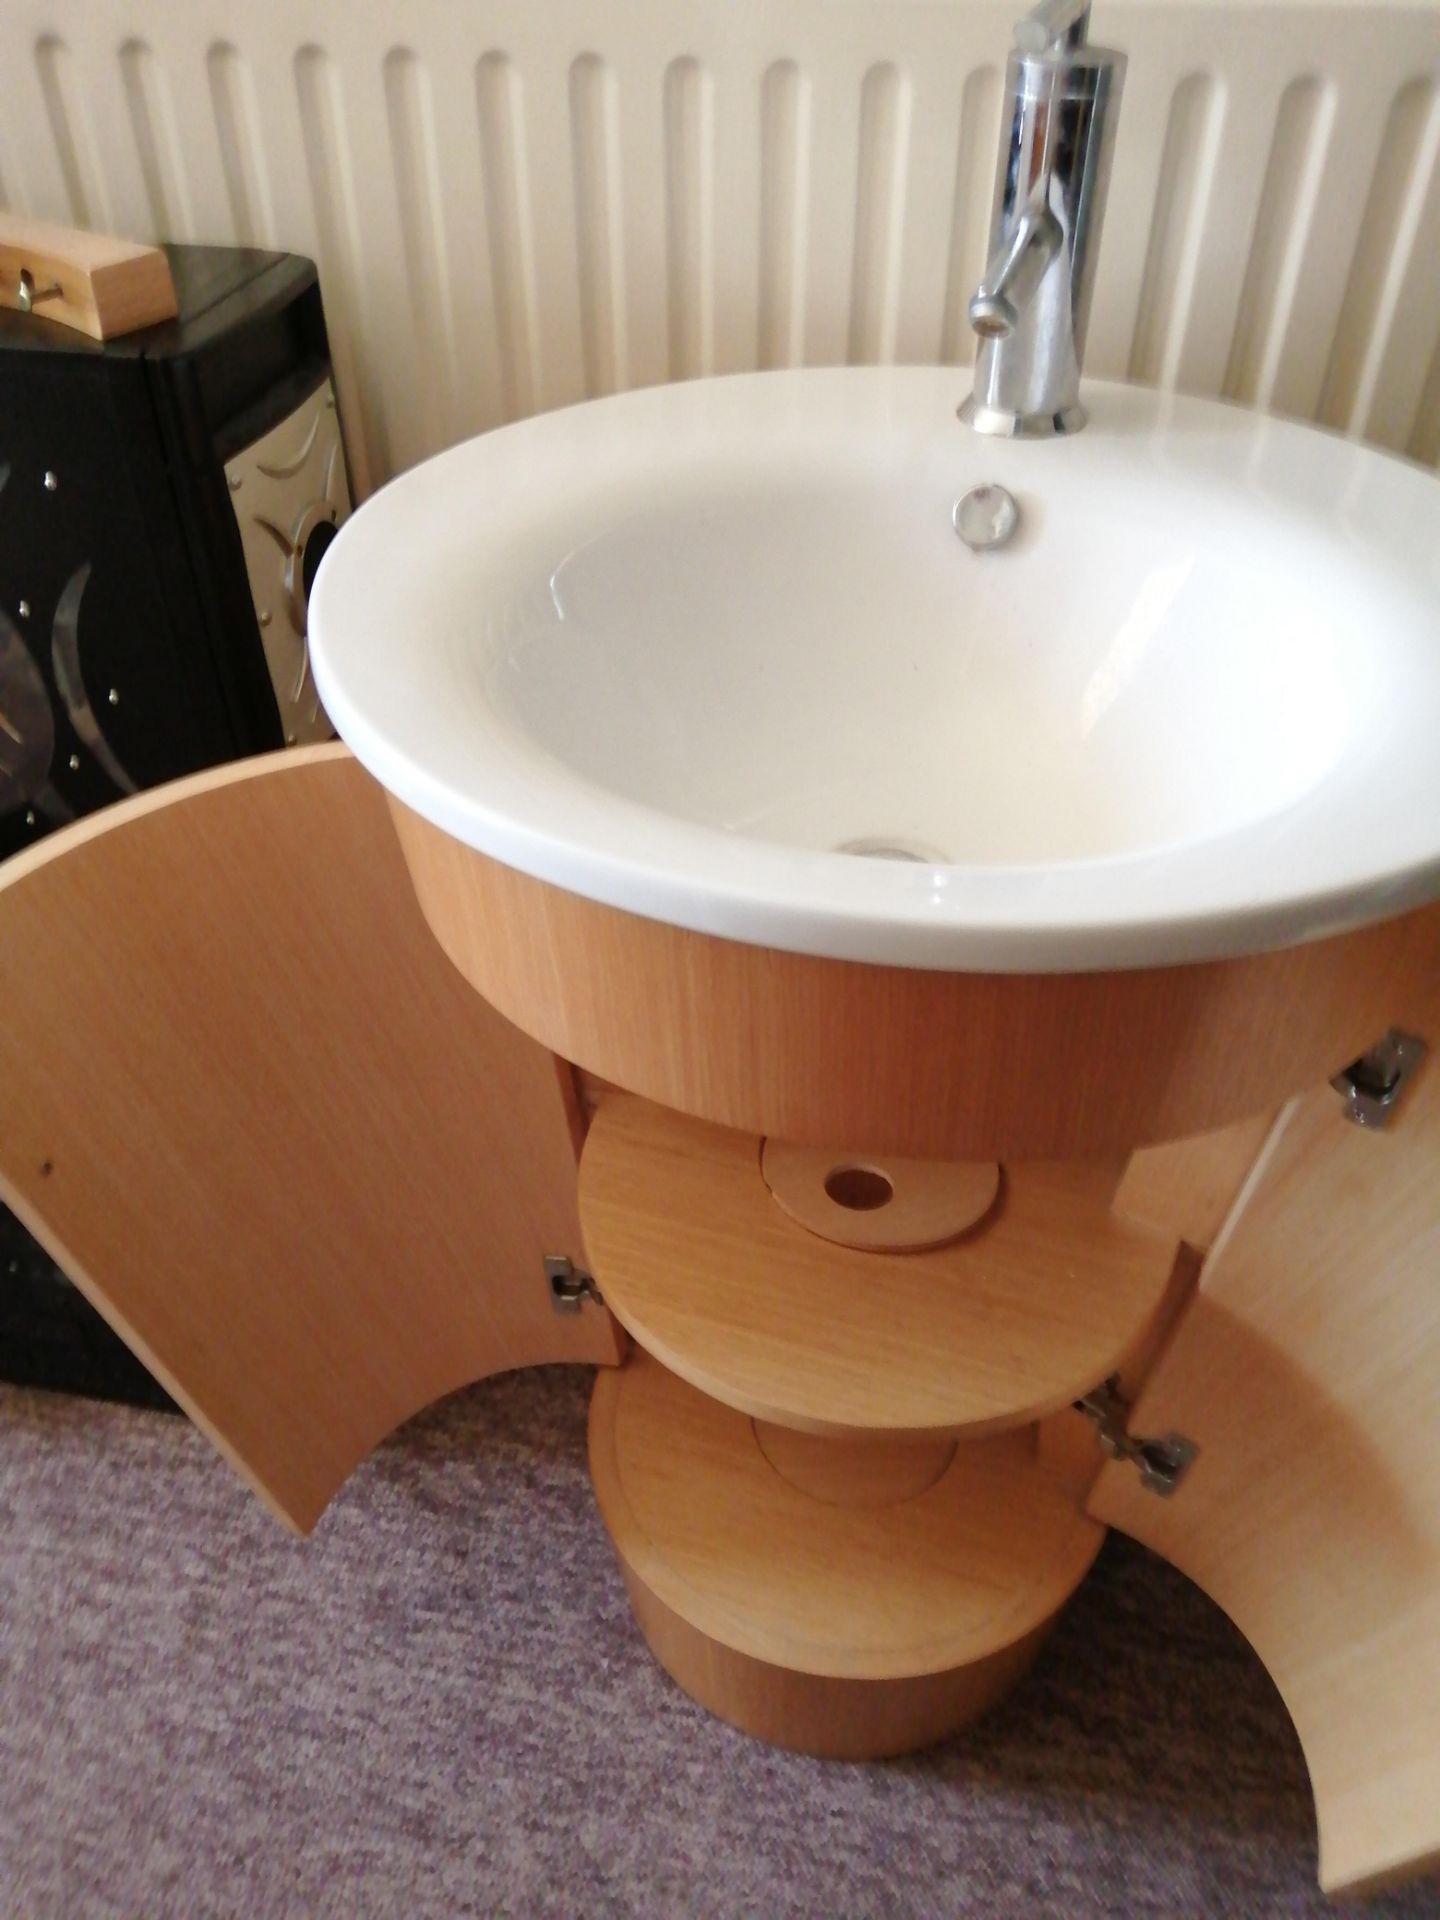 Phillip Starck Vanity Basin A Perfect Amalgam Of Ergonomics, Style And Convenience, By Installing - Image 7 of 8